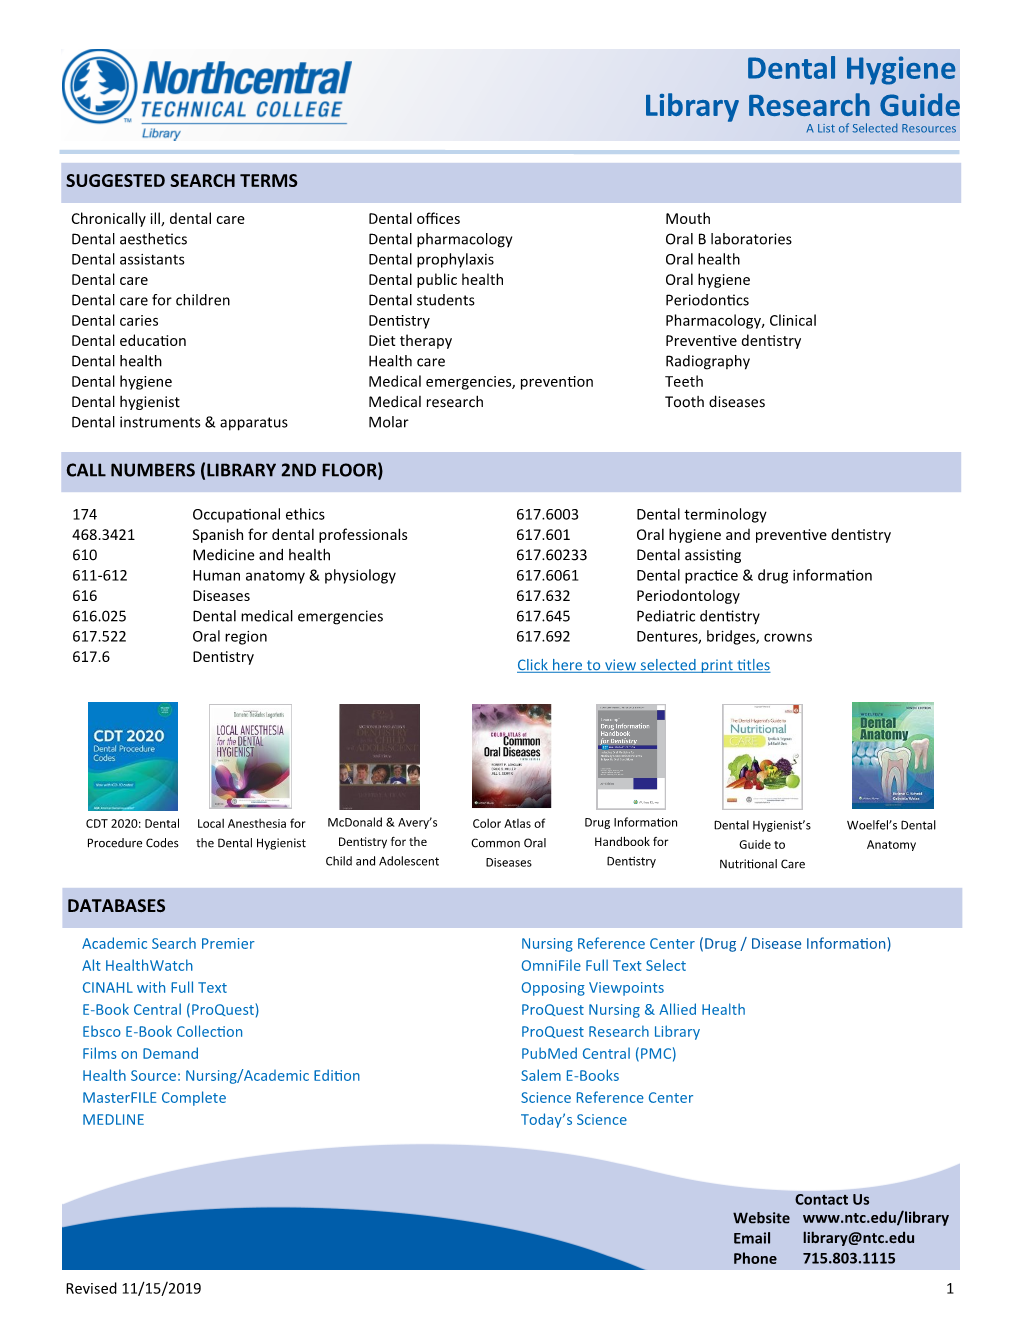 Dental Hygiene Library Research Guide a List of Selected Resources